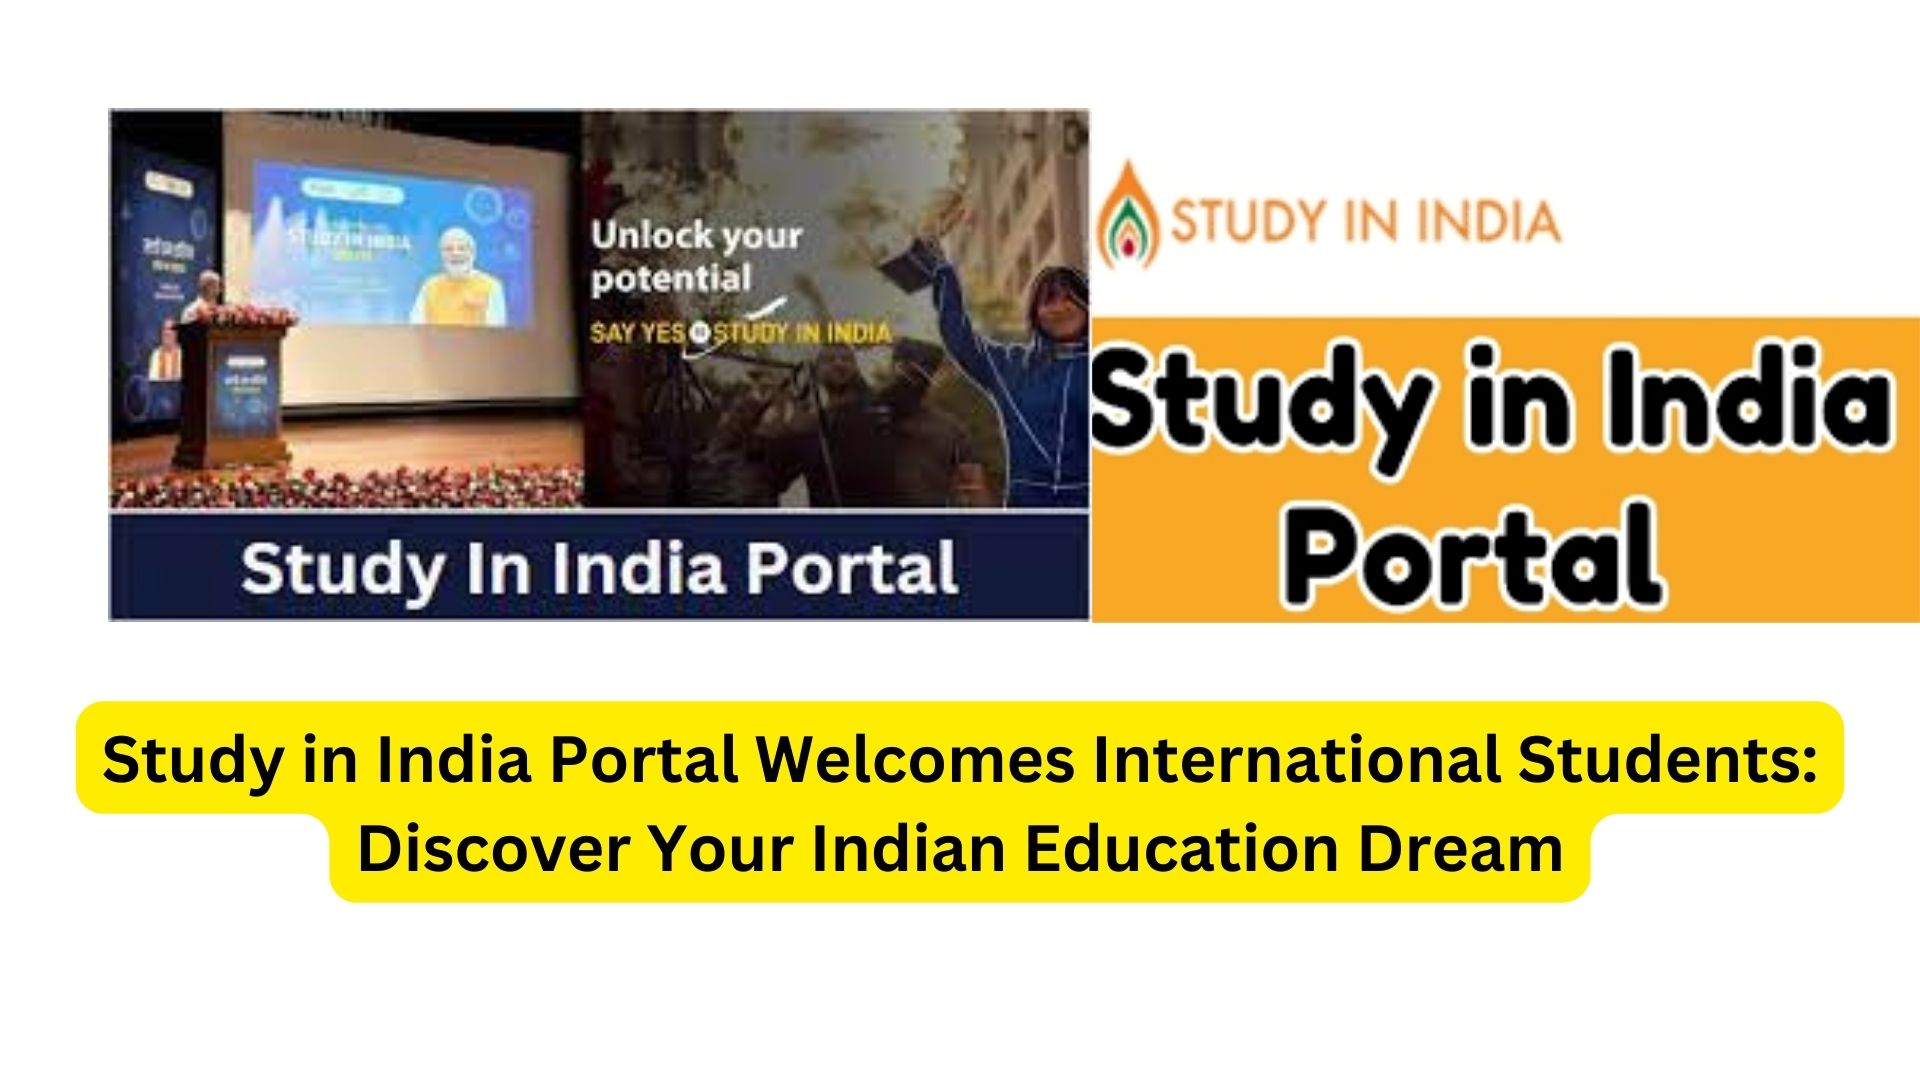 Study in India Portal Welcomes International Students: Discover Your Indian Education Dream